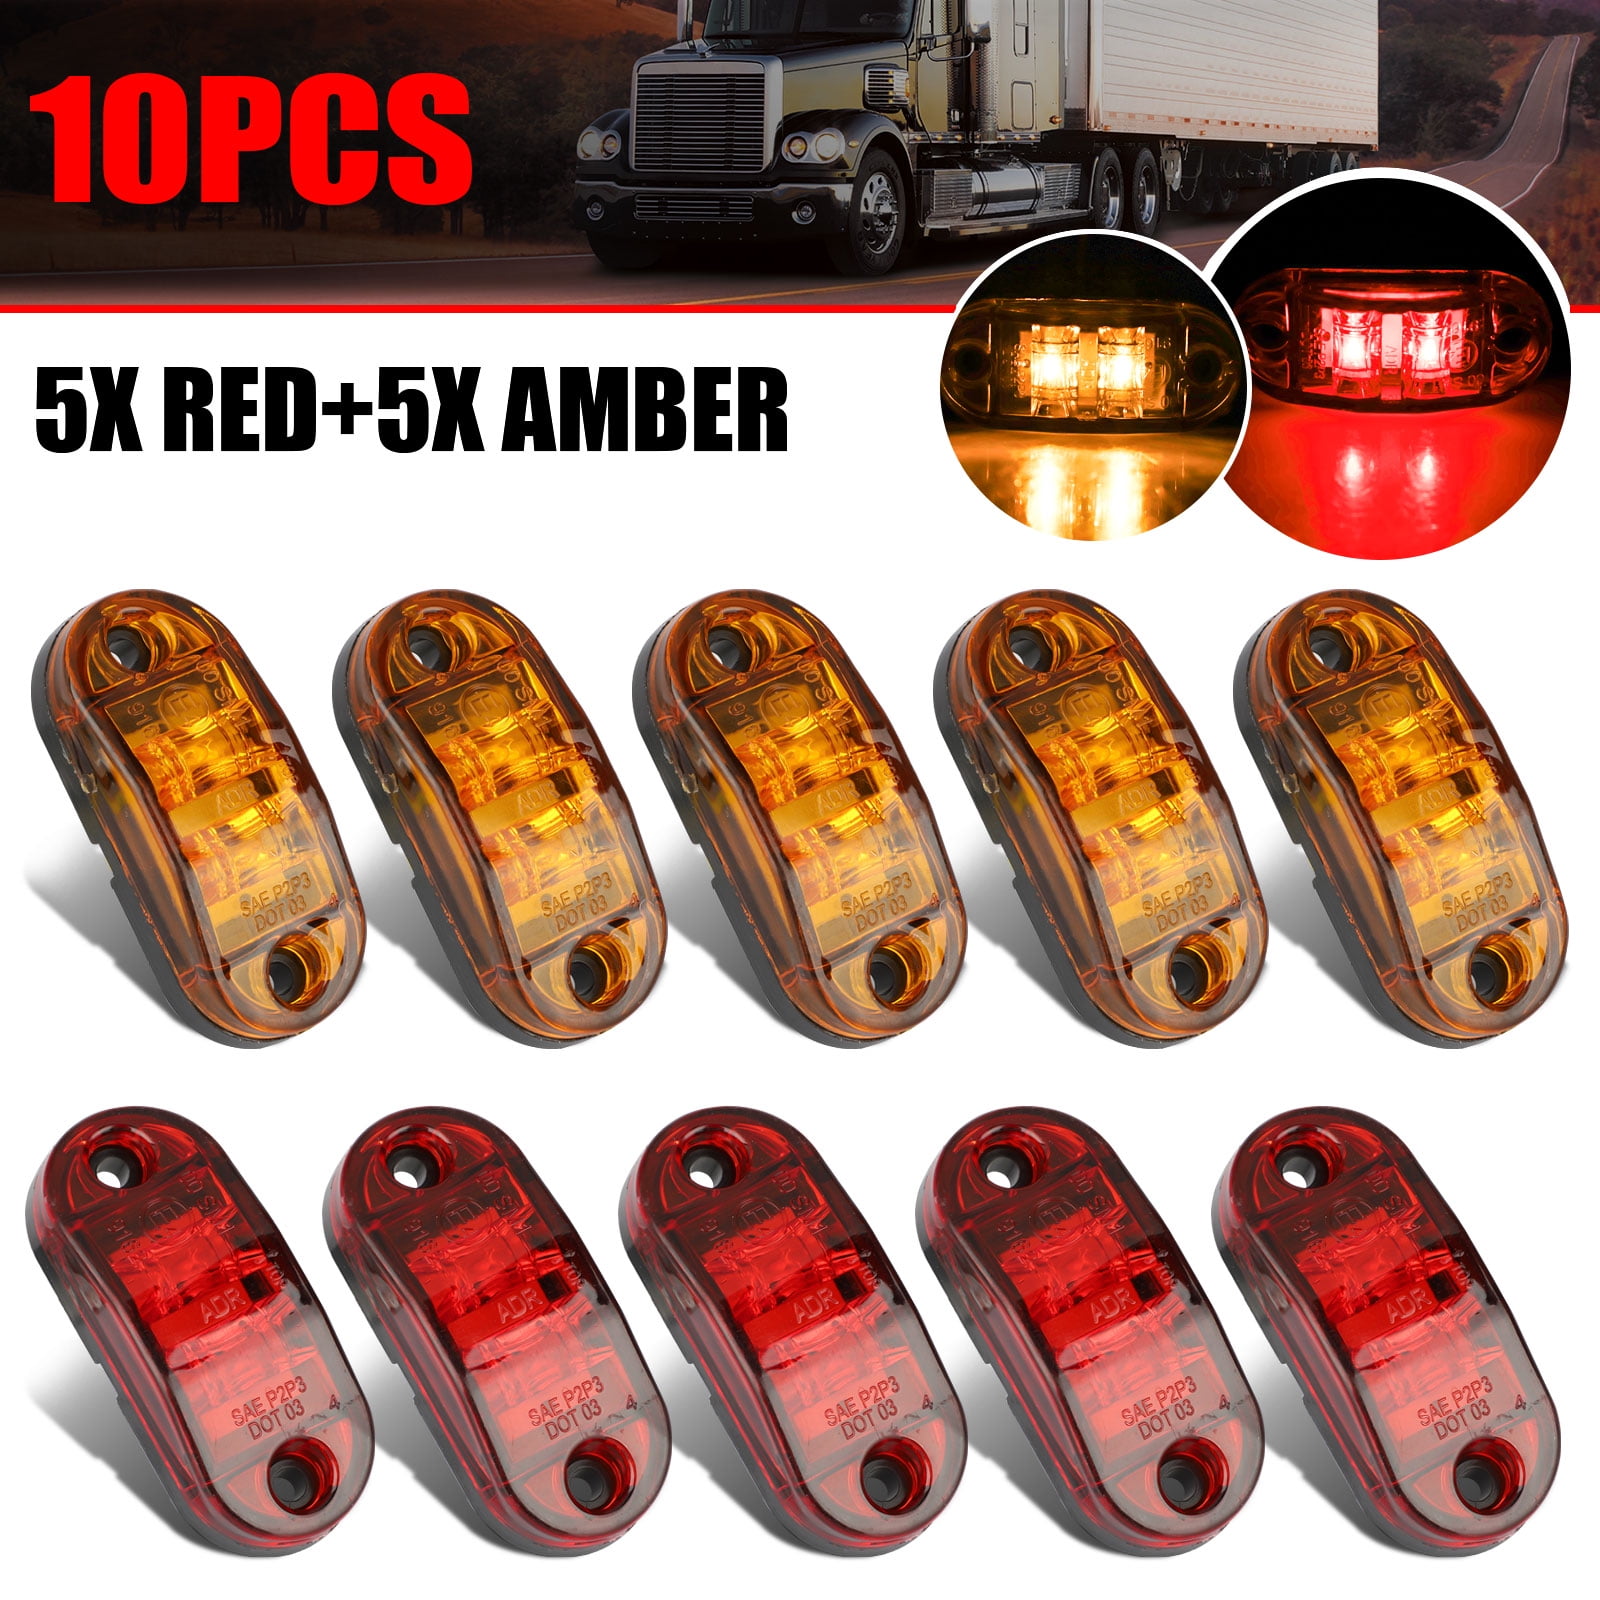 20PCS Amber Red LED Side Marker Indicators Light DC12-24V Front Rear Tail Lamp with Chrome Bezel for Truck Trailer Boat Bus Lorry RV Cab LED Marker Light 